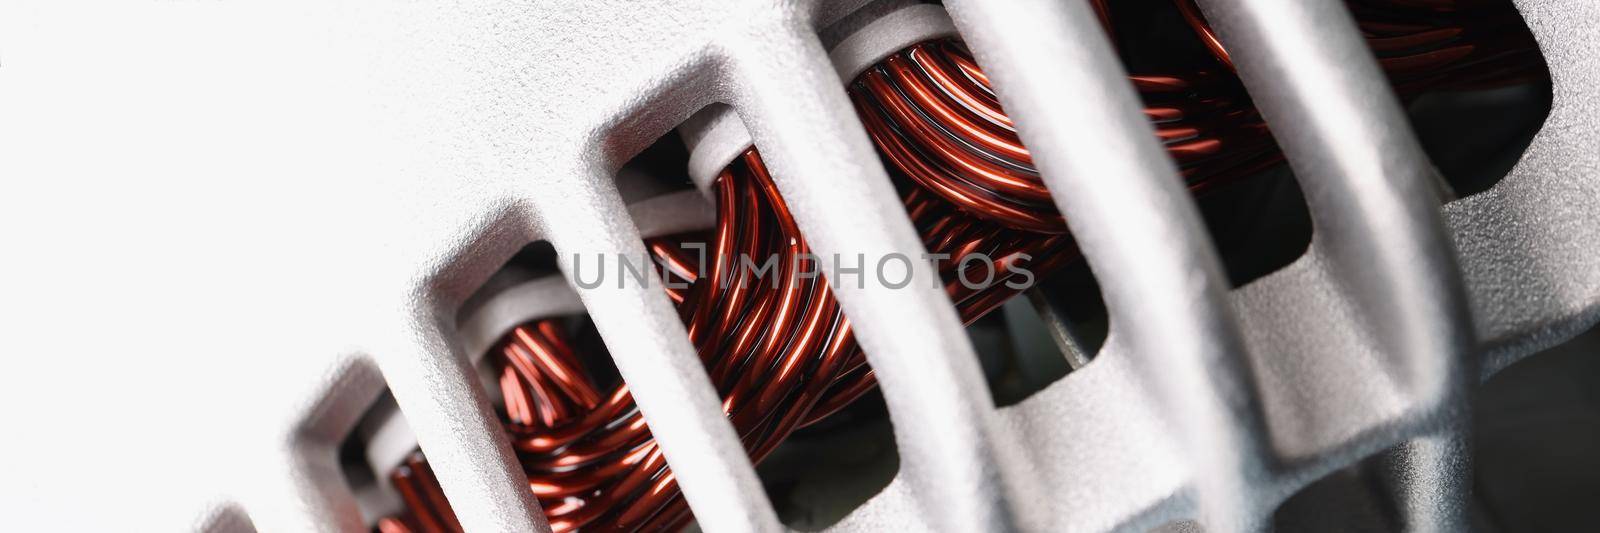 Close-up of electric motor stator with winding coil, view of inside of electric induction motor under repairing, armature detail. Fix, repair, part concept